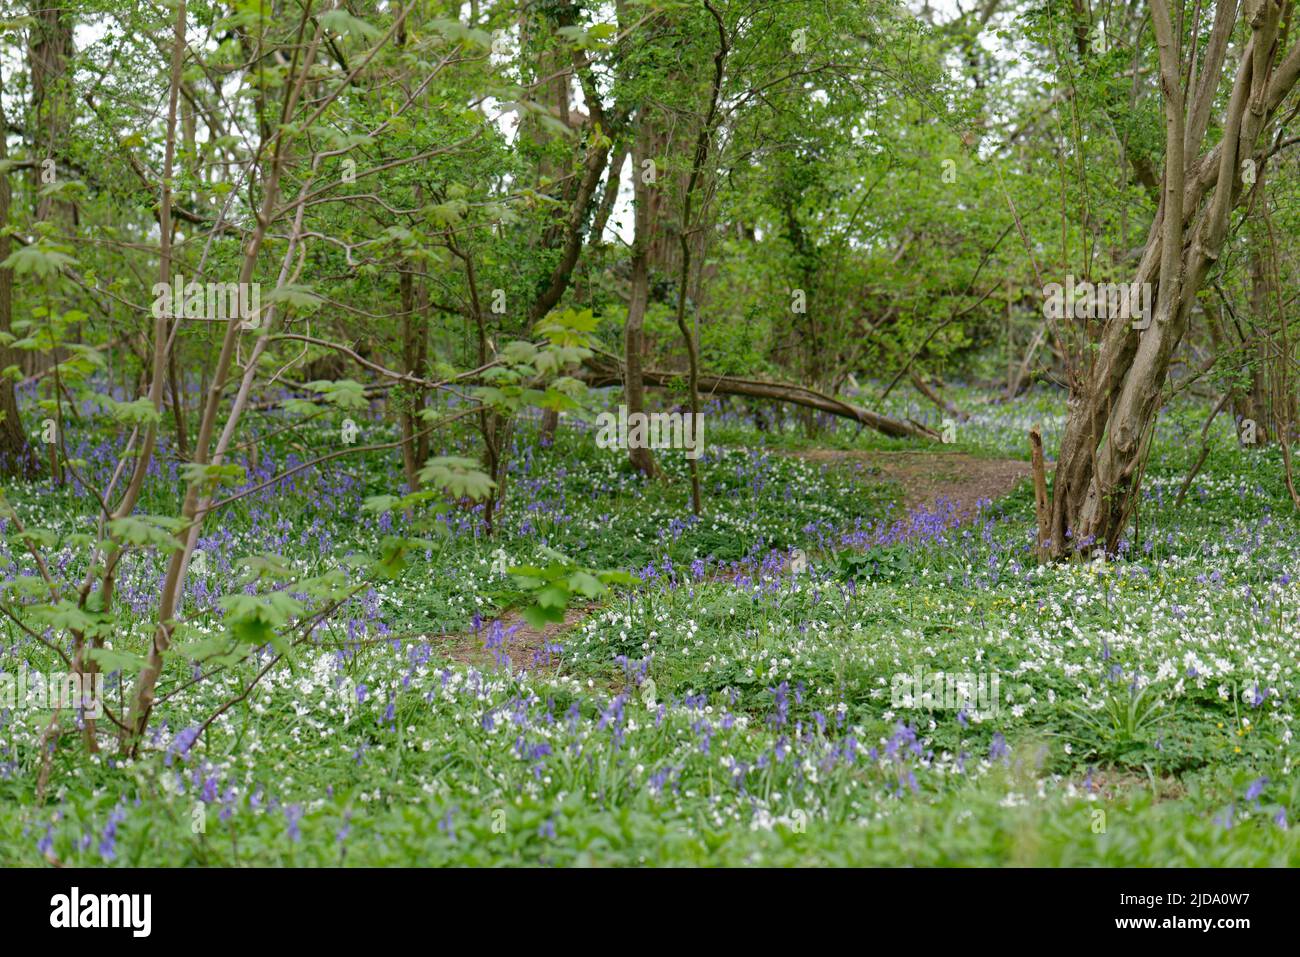 Anemones and  Bluebells Along a Path in Ancient British Woodland Stock Photo